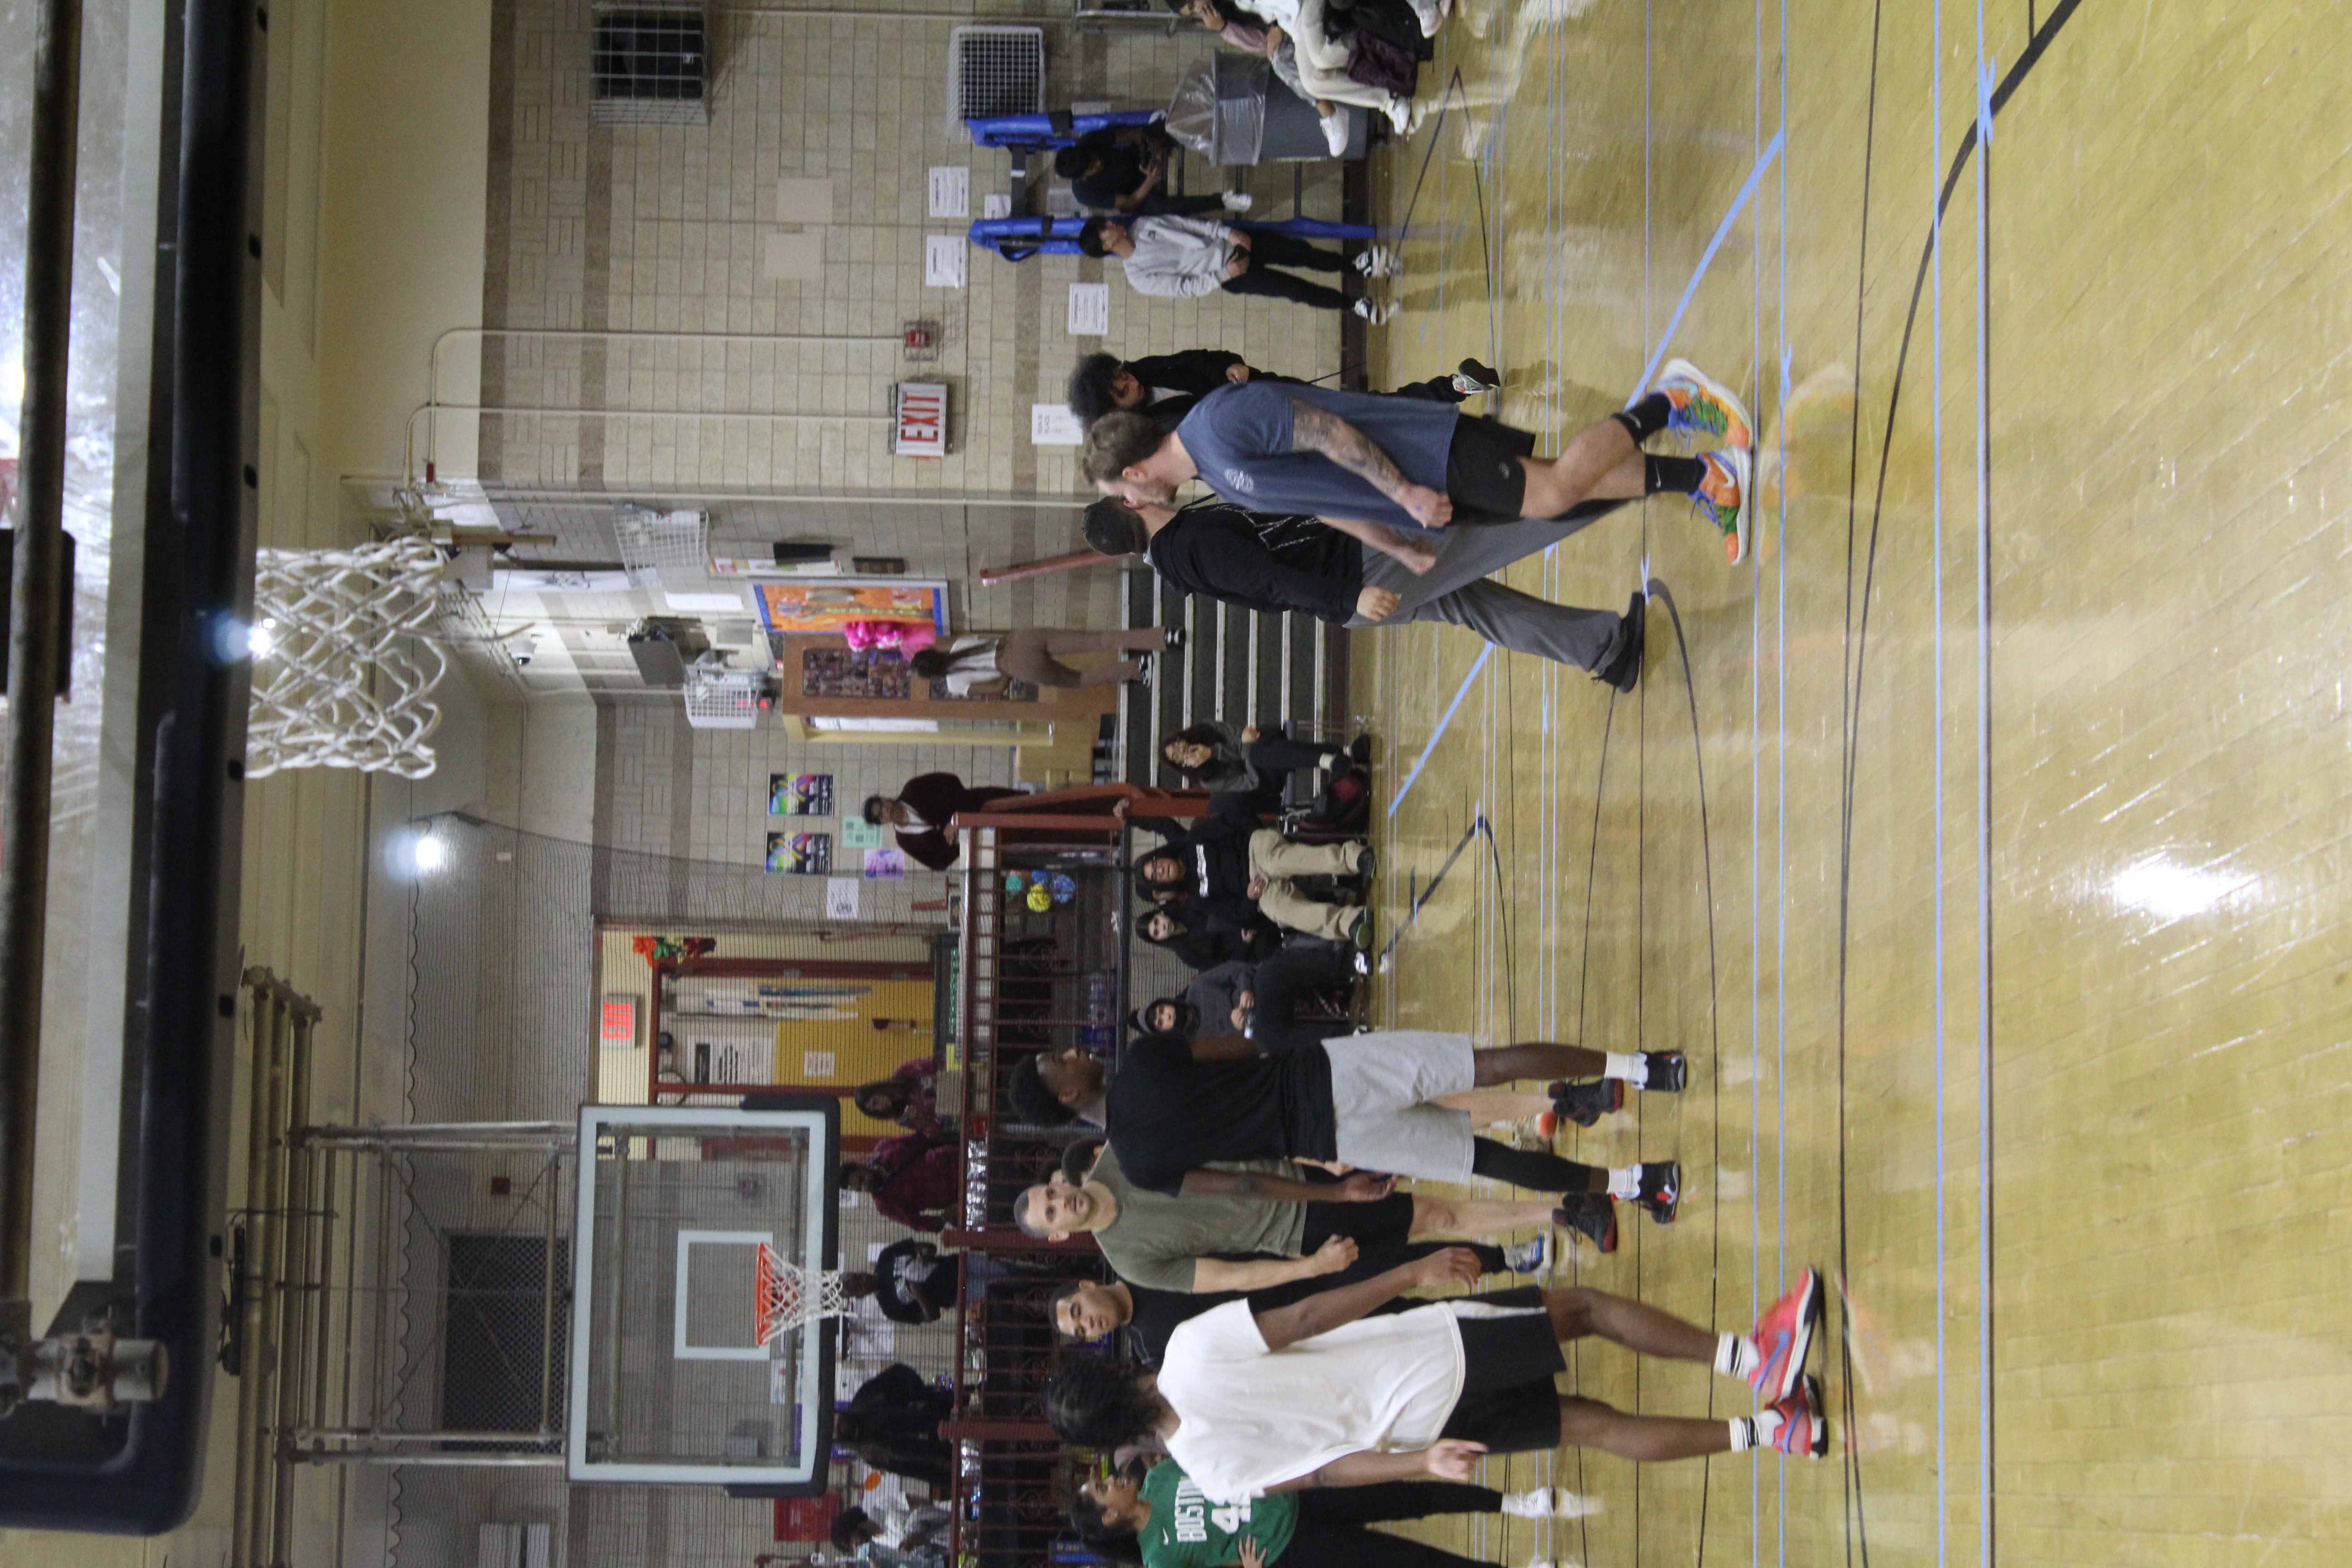 Seniors preparing to play against staff on the court